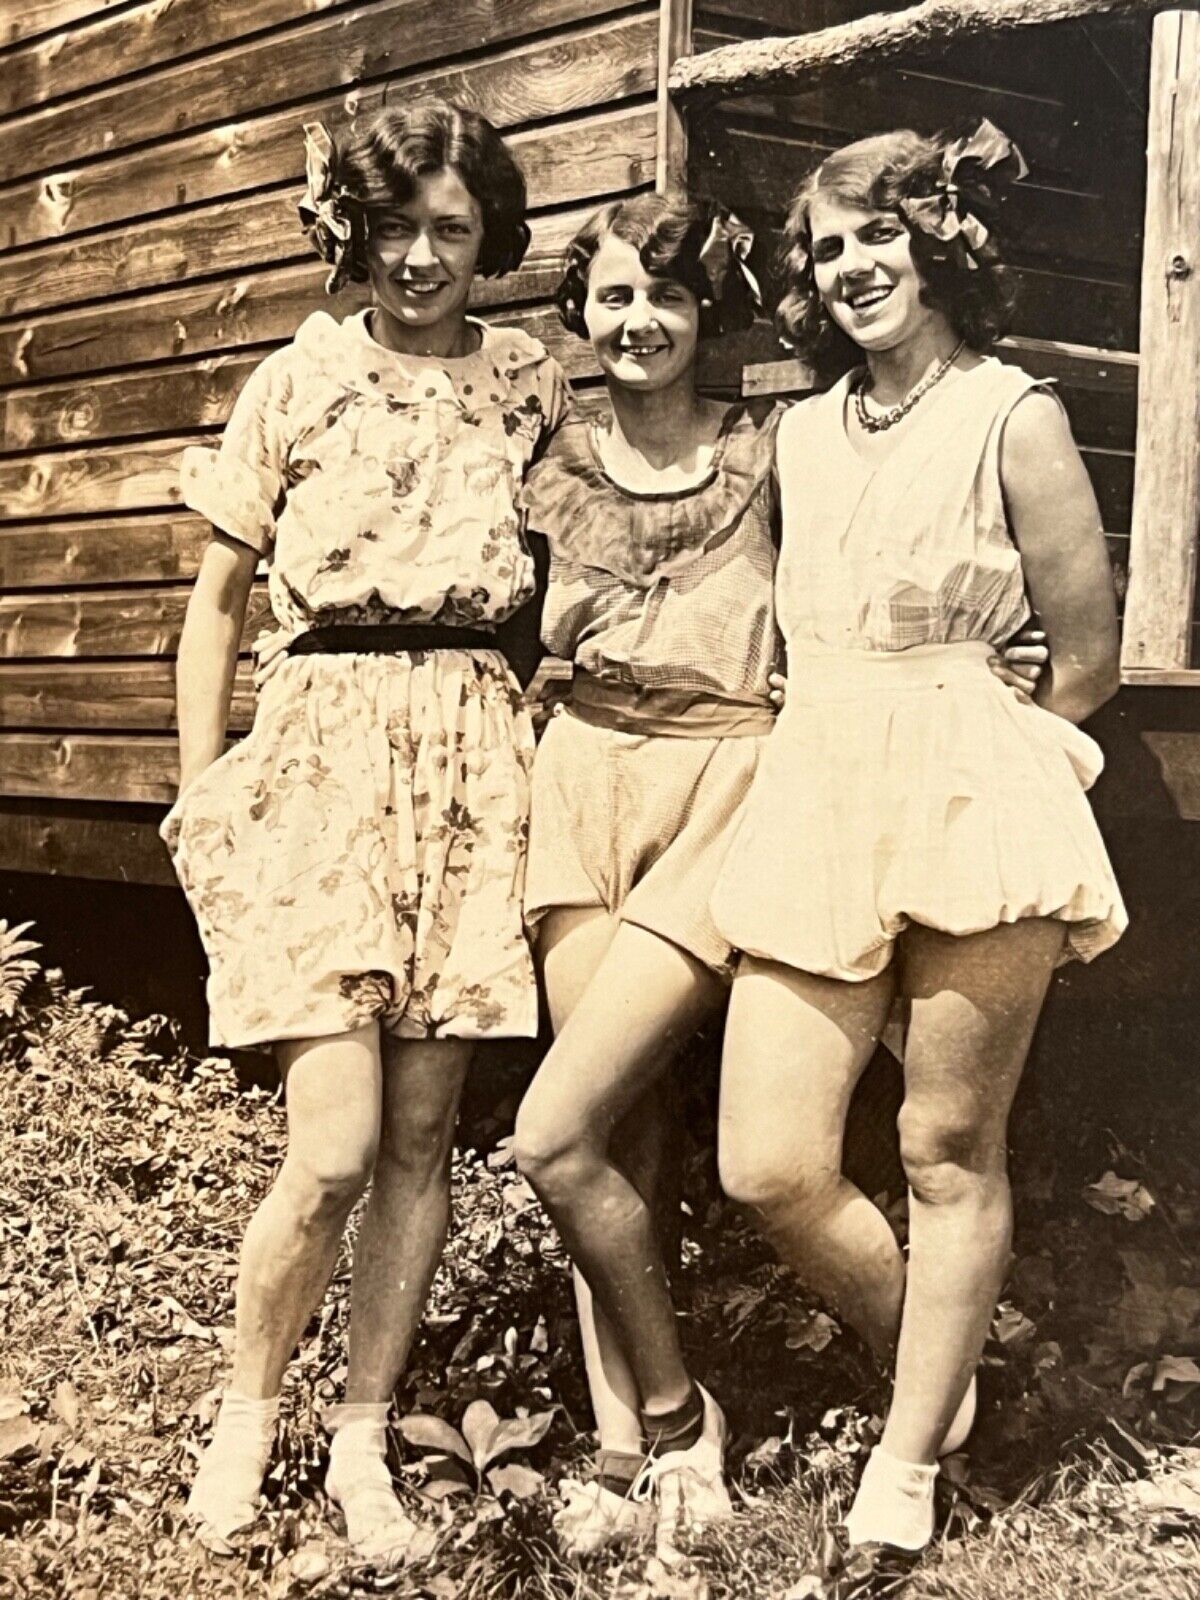 Pretty Girls in Short Bloomers Showing Legs Hair Bows Vintage Photograph c1930